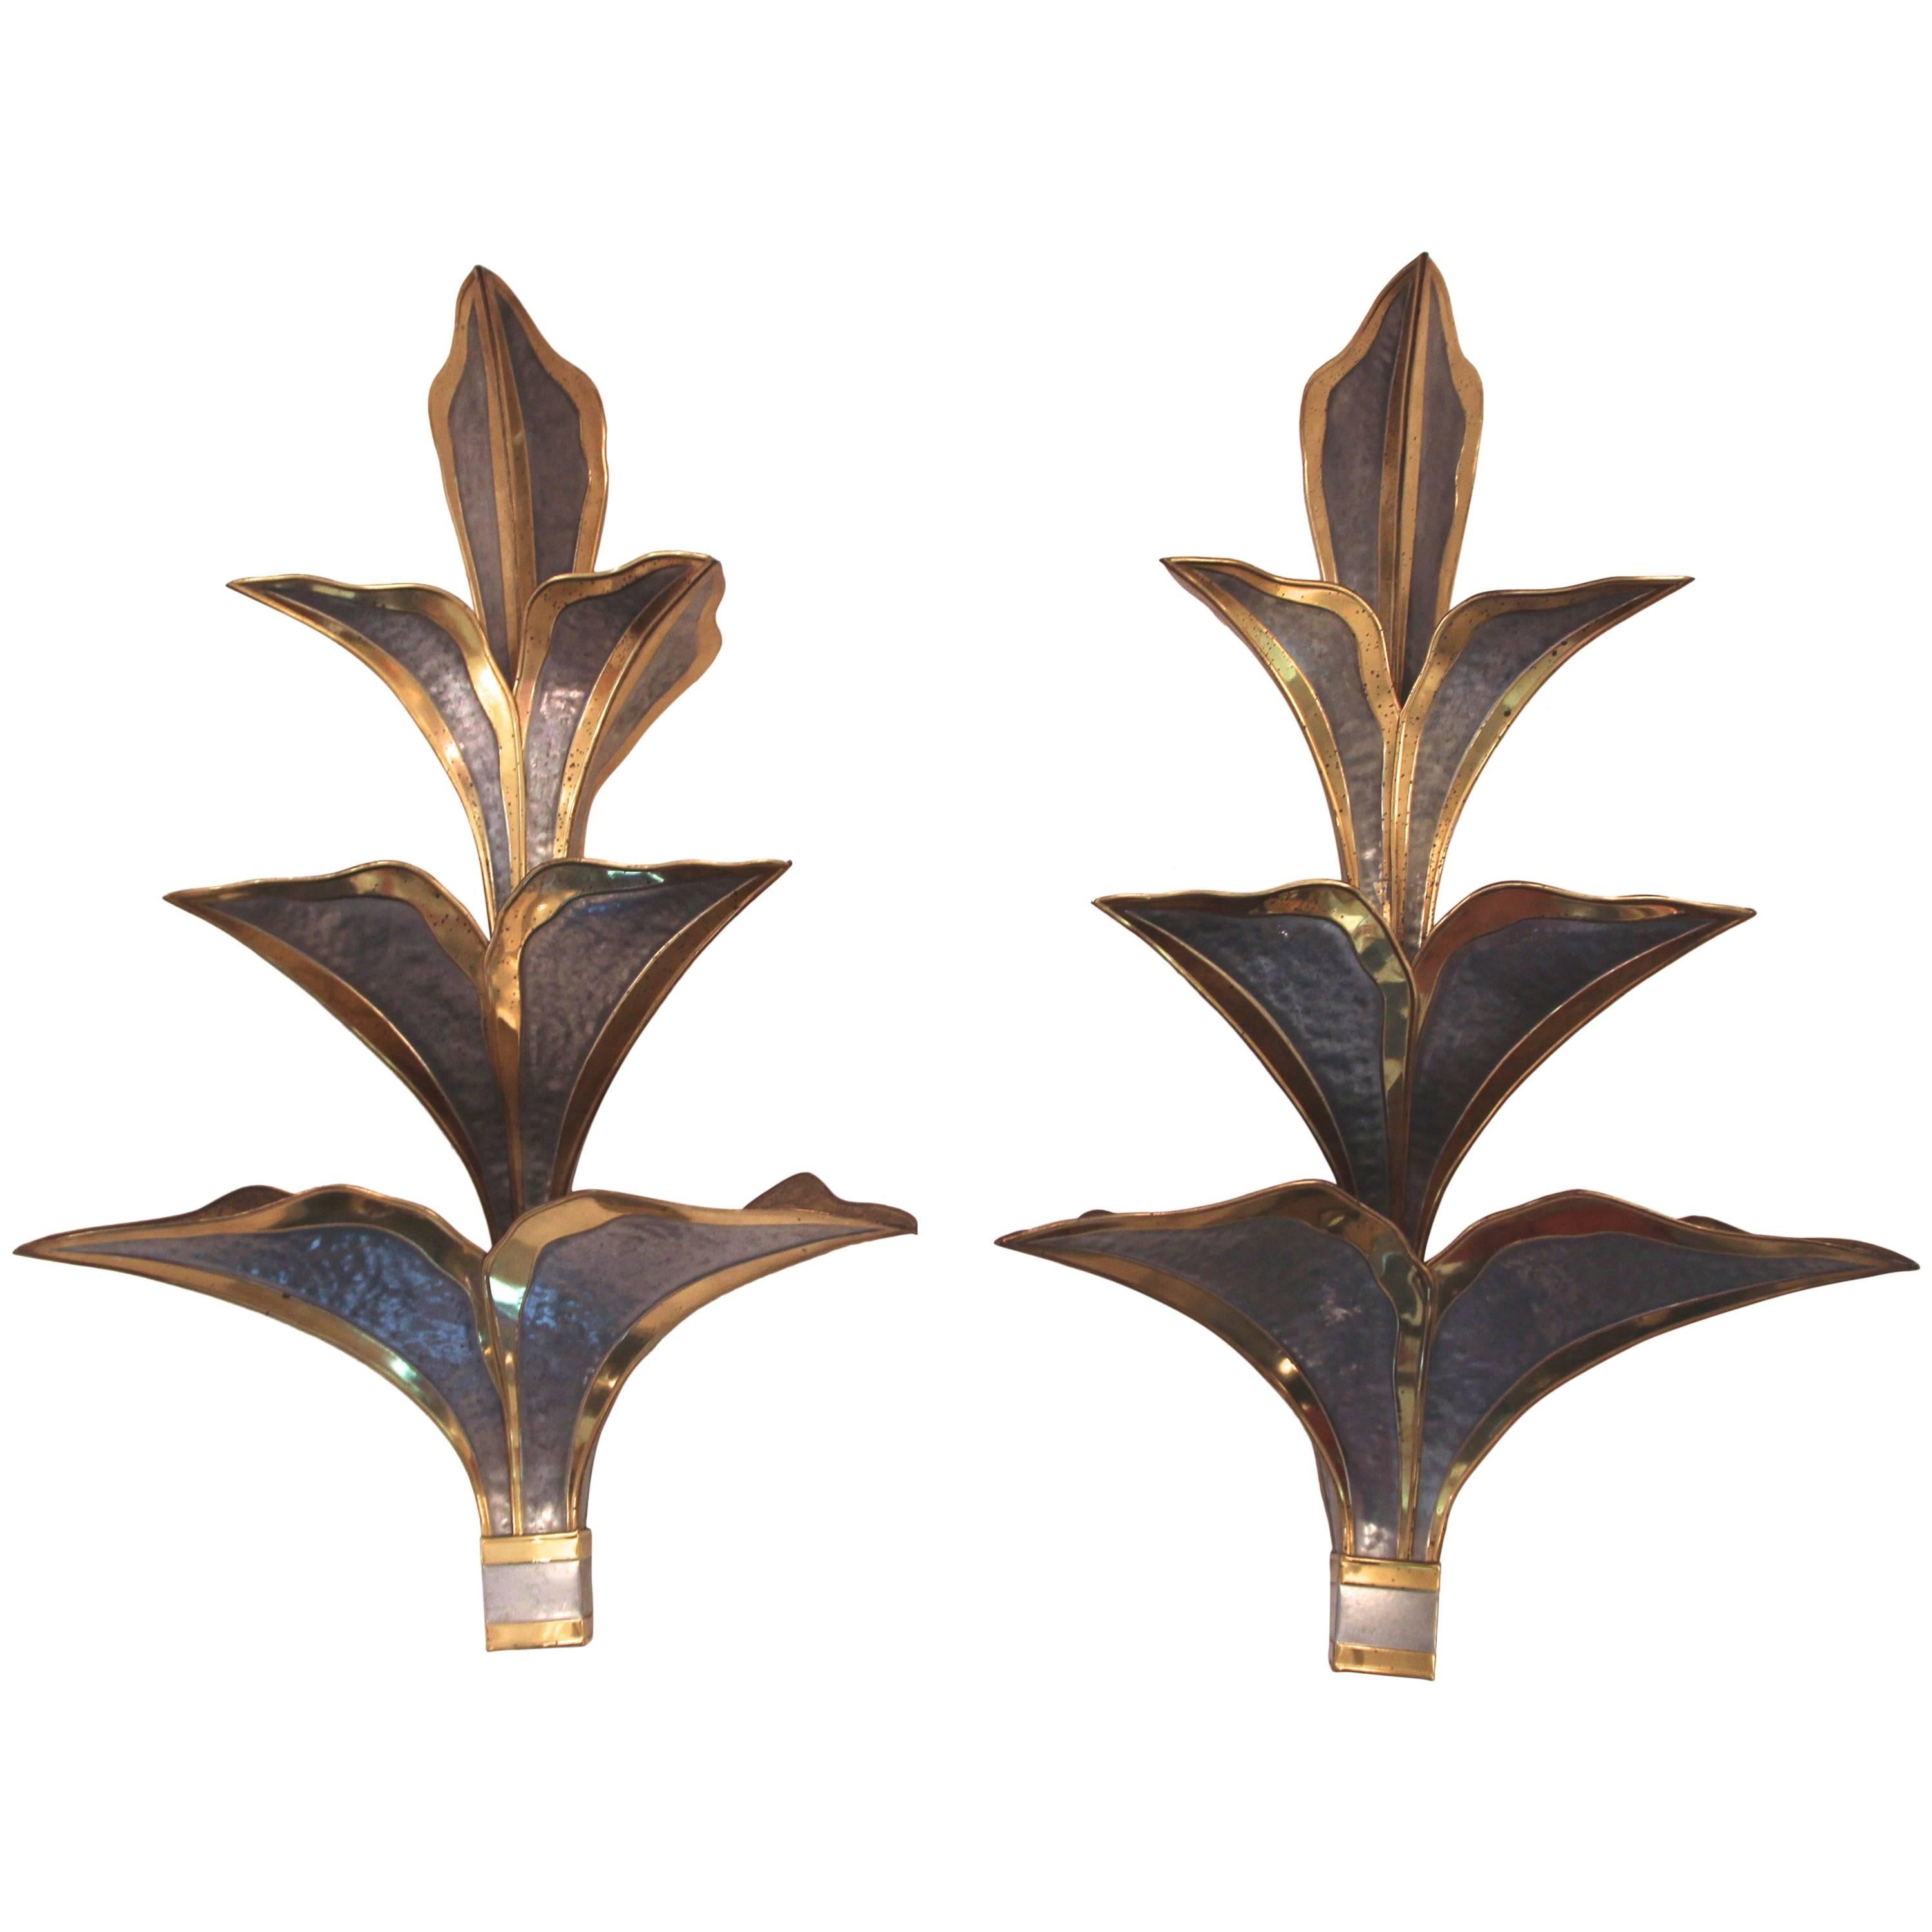 Maison Jansen, Pair of Sconces, Gold-Plated Brass and Metal, circa 1970, France